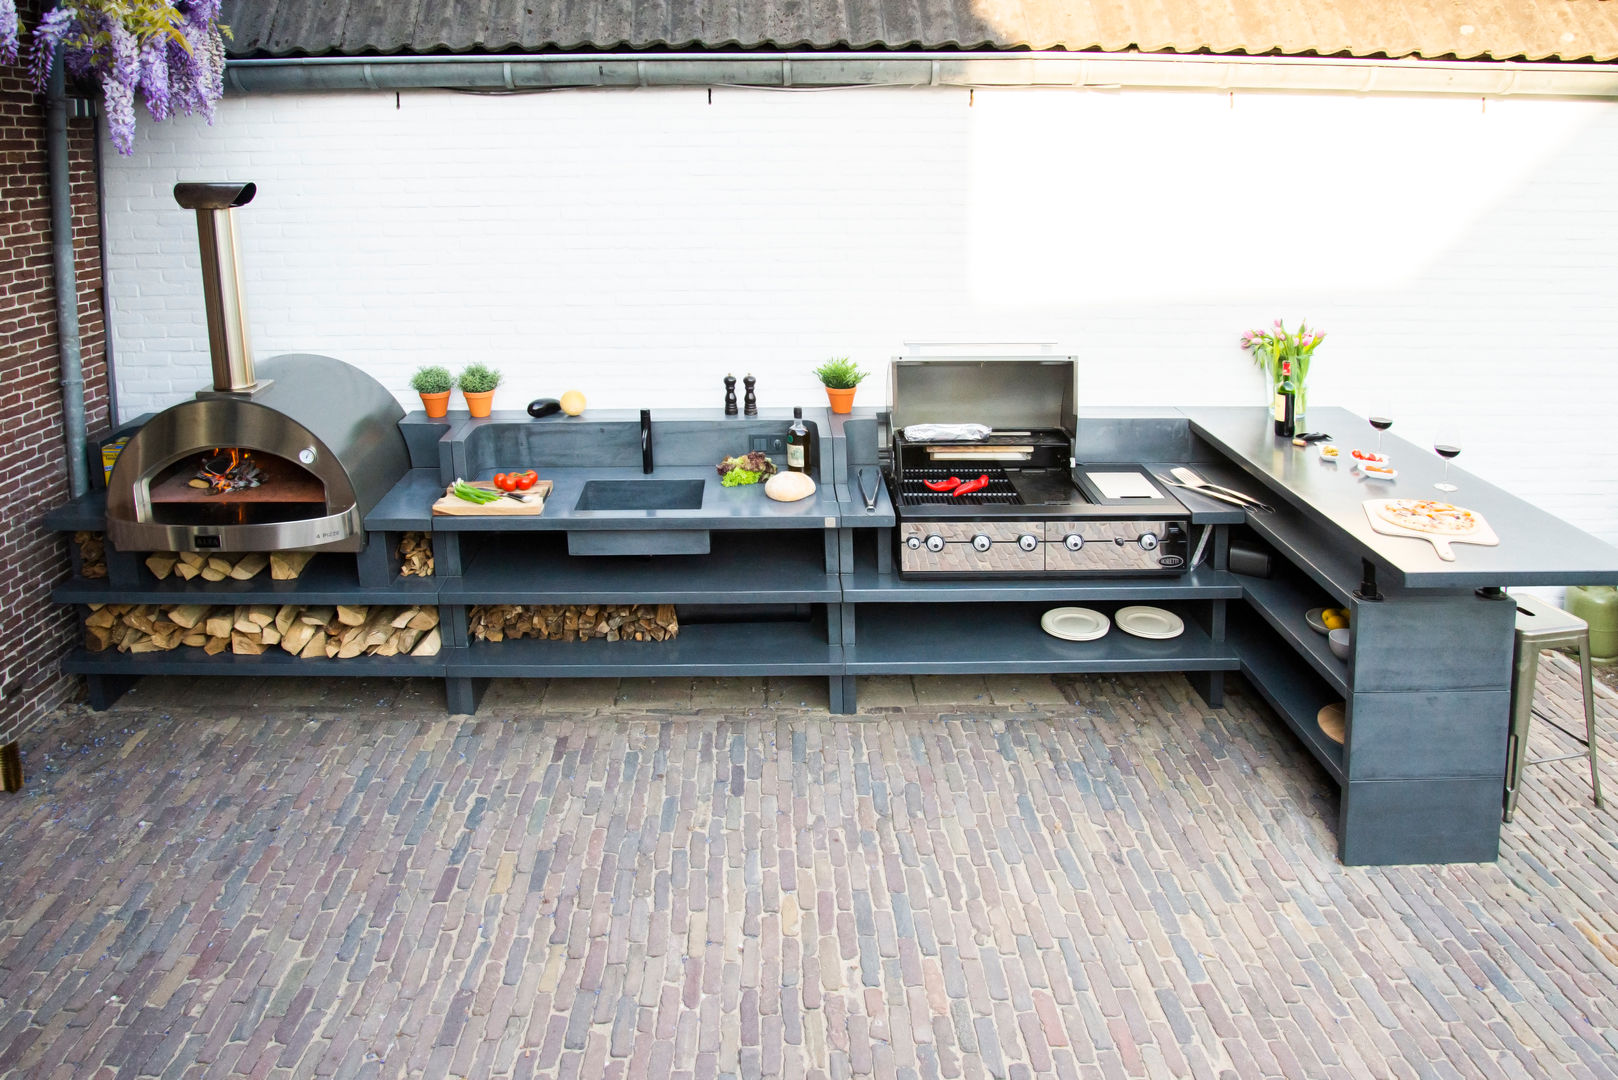 Designing Your Own Outdoor Kitchen | homify